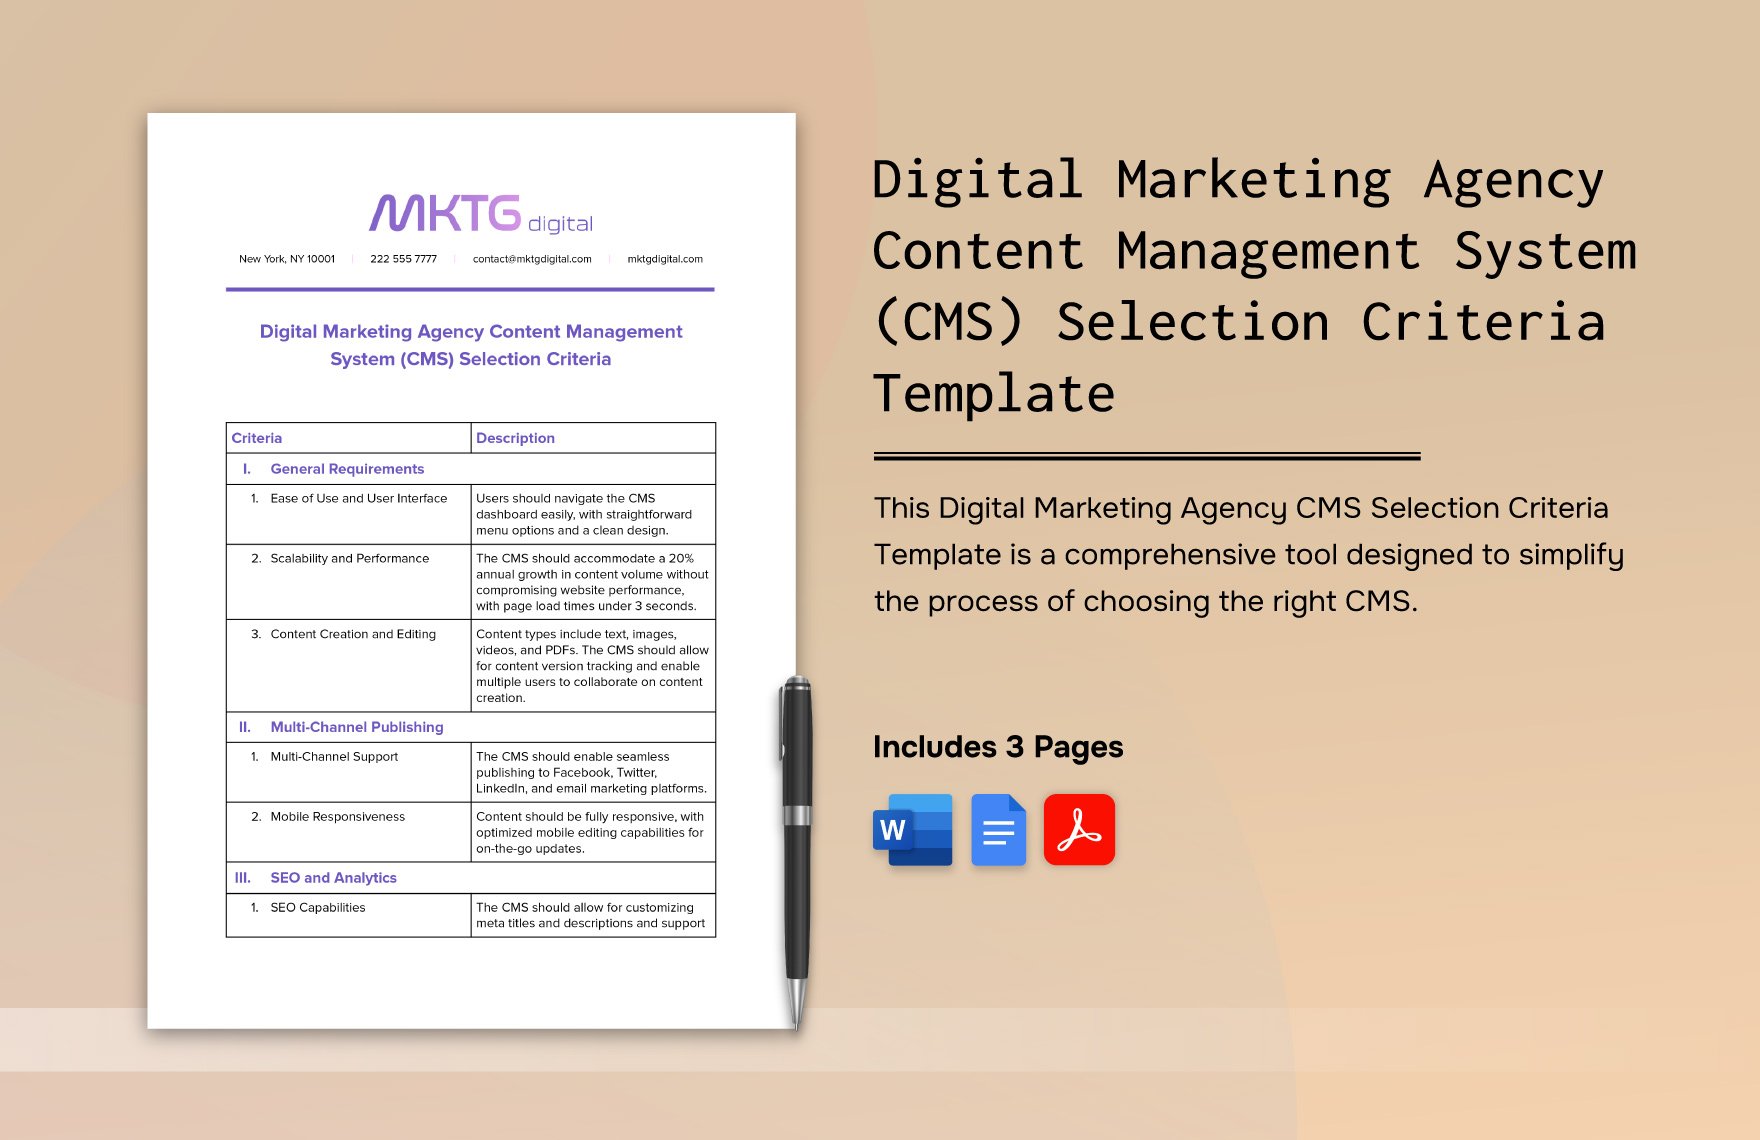 Digital Marketing Agency Content Management System (CMS) Selection Criteria Template